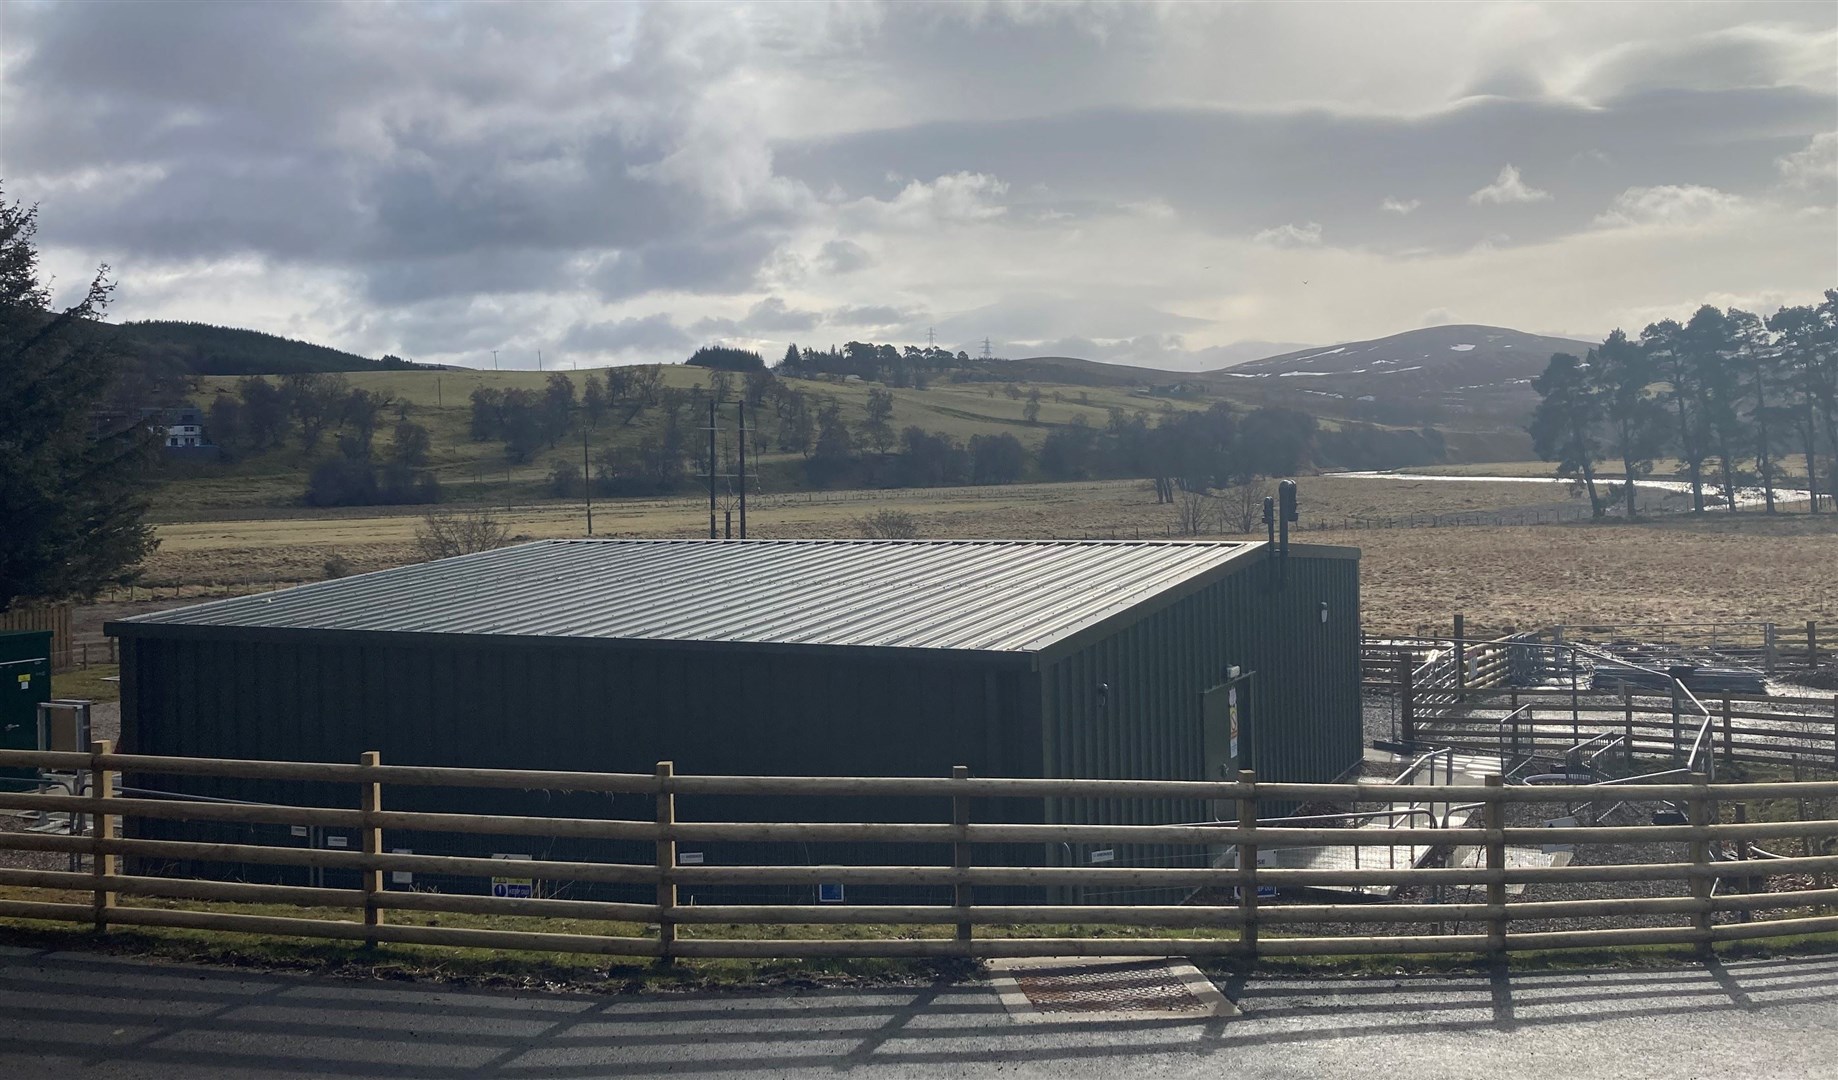 The new state-of-the-art facility serving Tomatin.